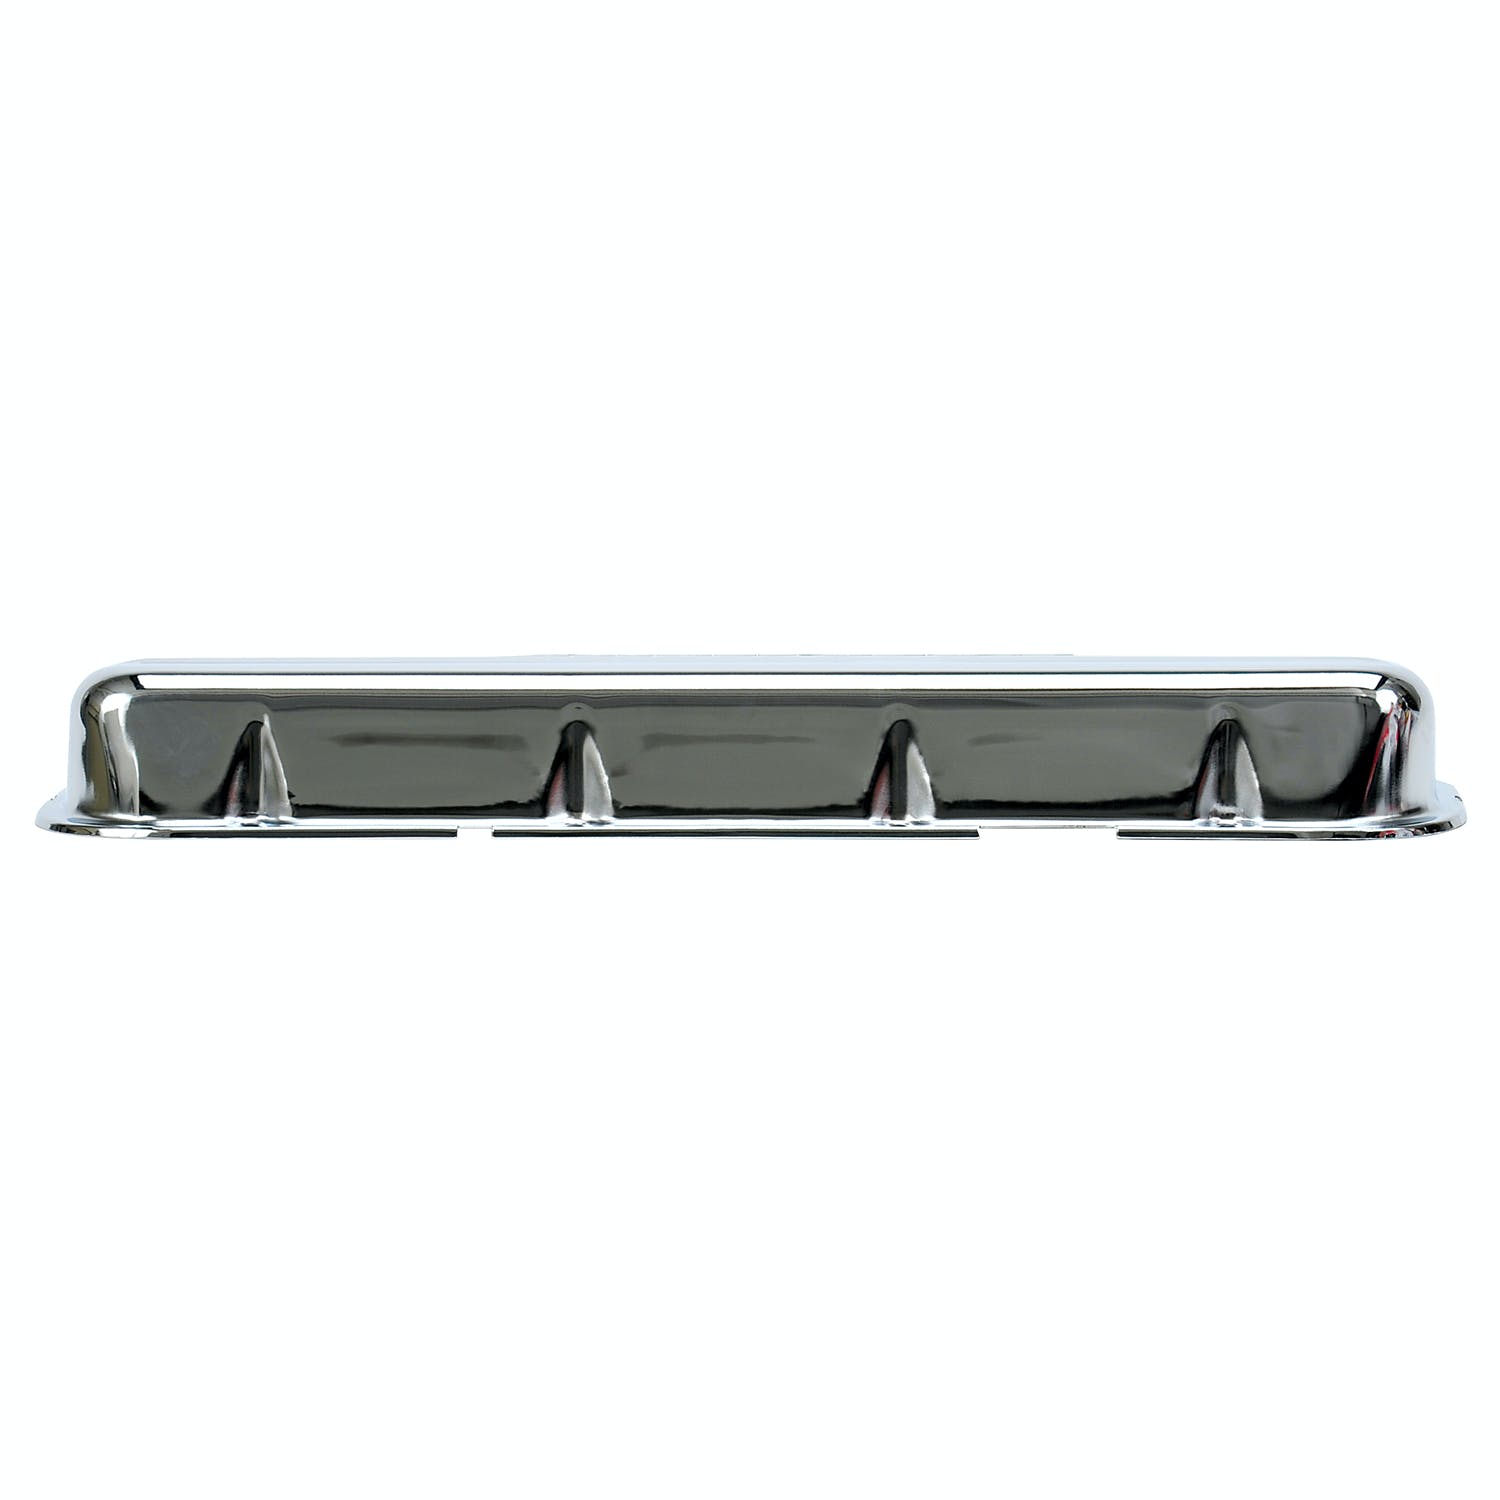 Edelbrock 4480 Signature Series Valve Covers for Chevrolet 396-502 V8 65 and Later